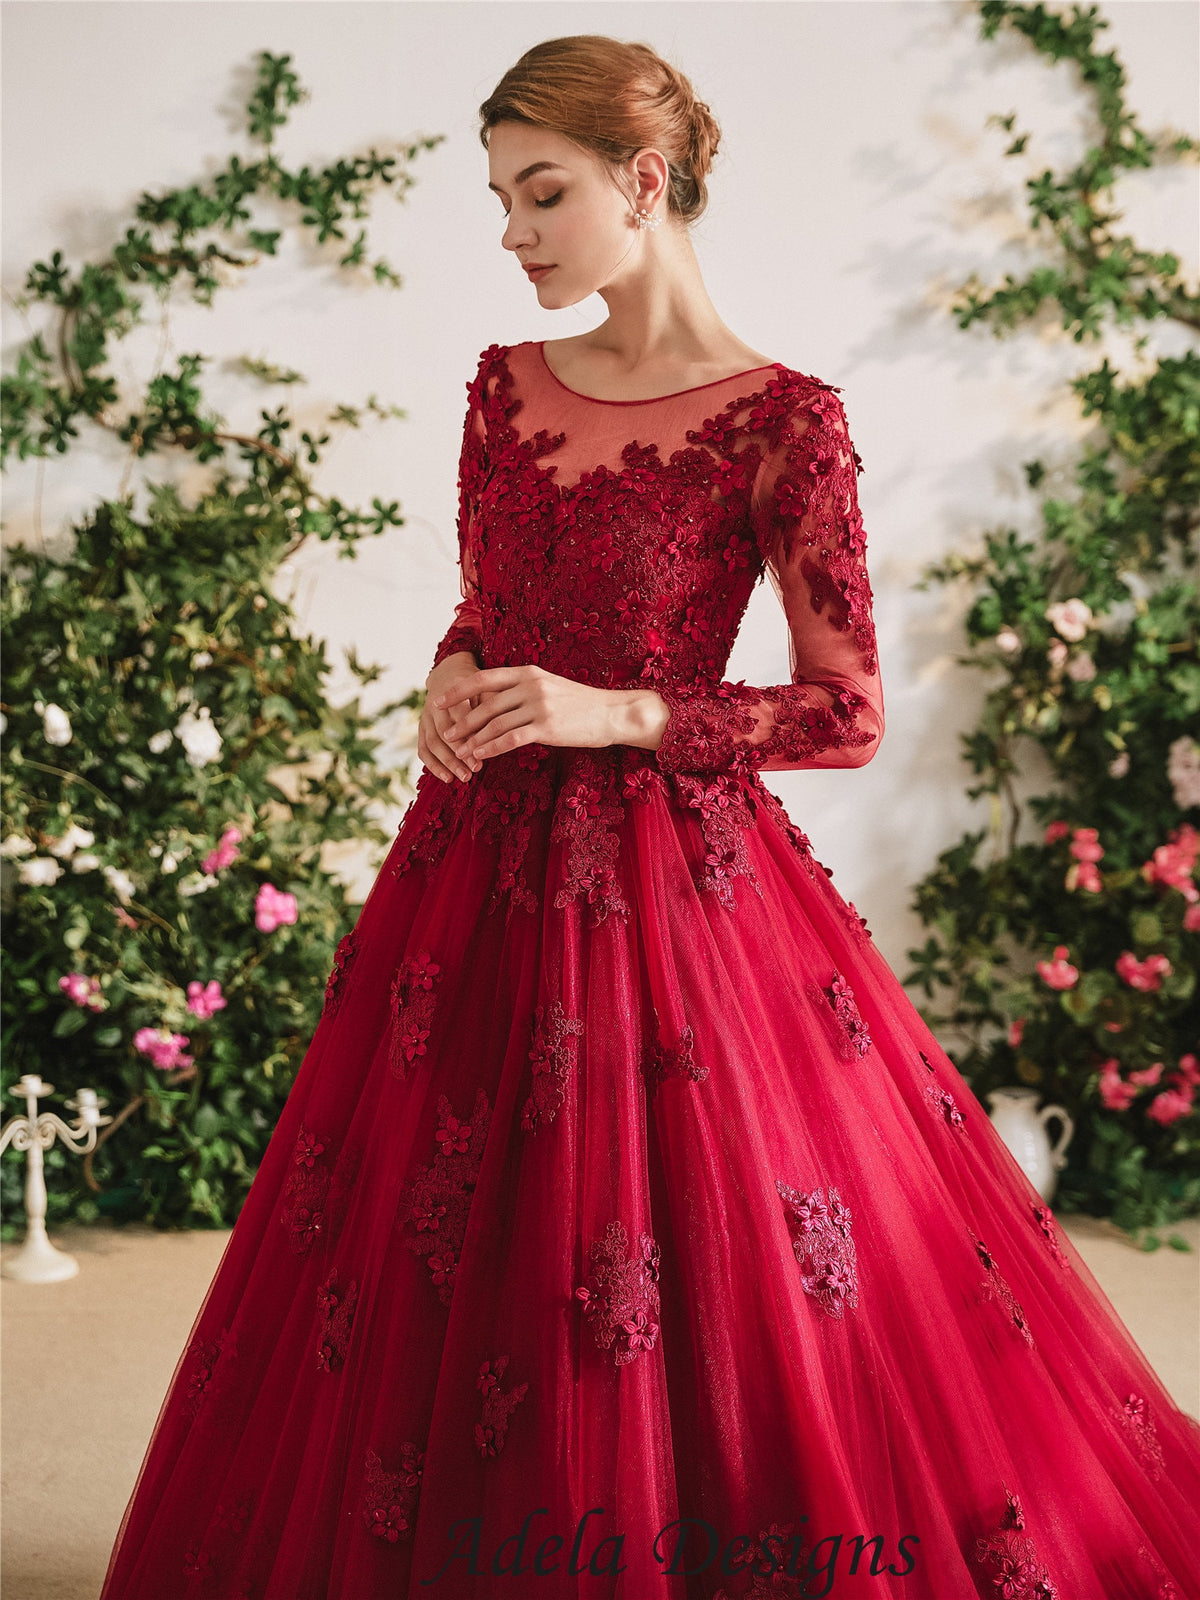 Unconventional Dark Red Bridal Ball Gown Colorful Wedding Dress Full Classic Long Sleeve 3d Flowers Illusion Neckline Full Aline Ball Gown